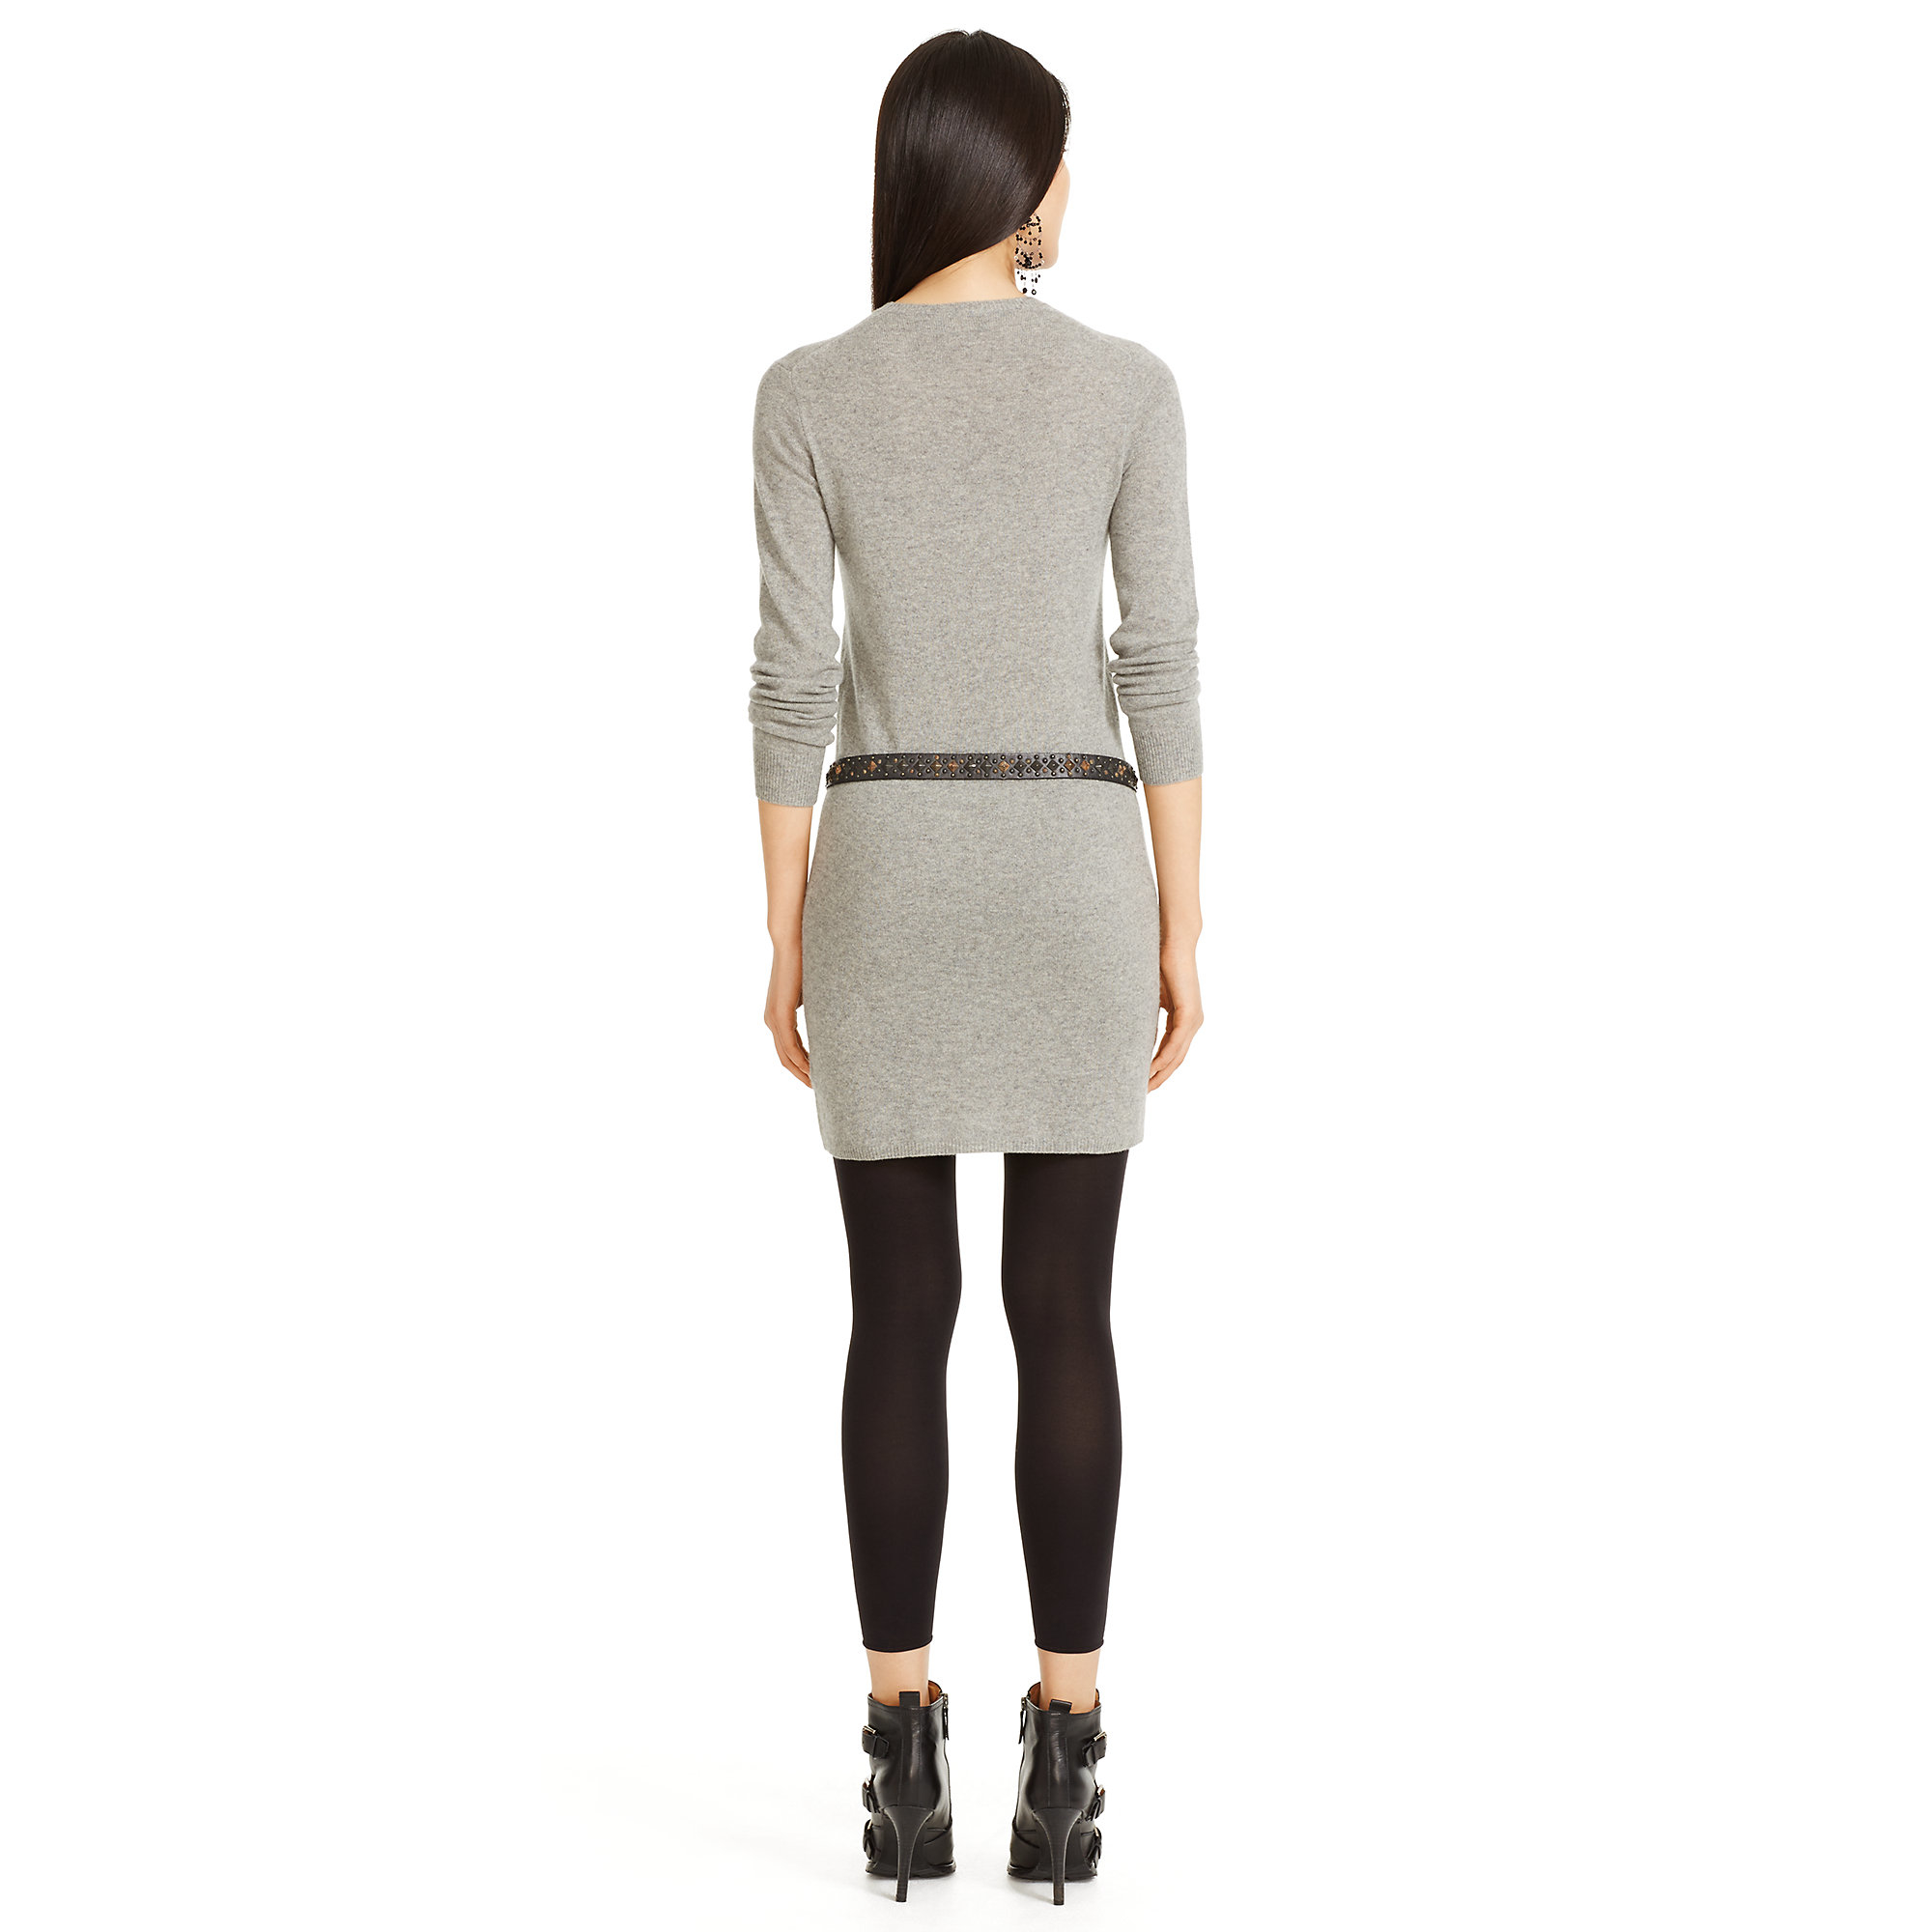 Polo ralph lauren Cashmere Sweater Dress in Gray (fawn grey heather) | Lyst